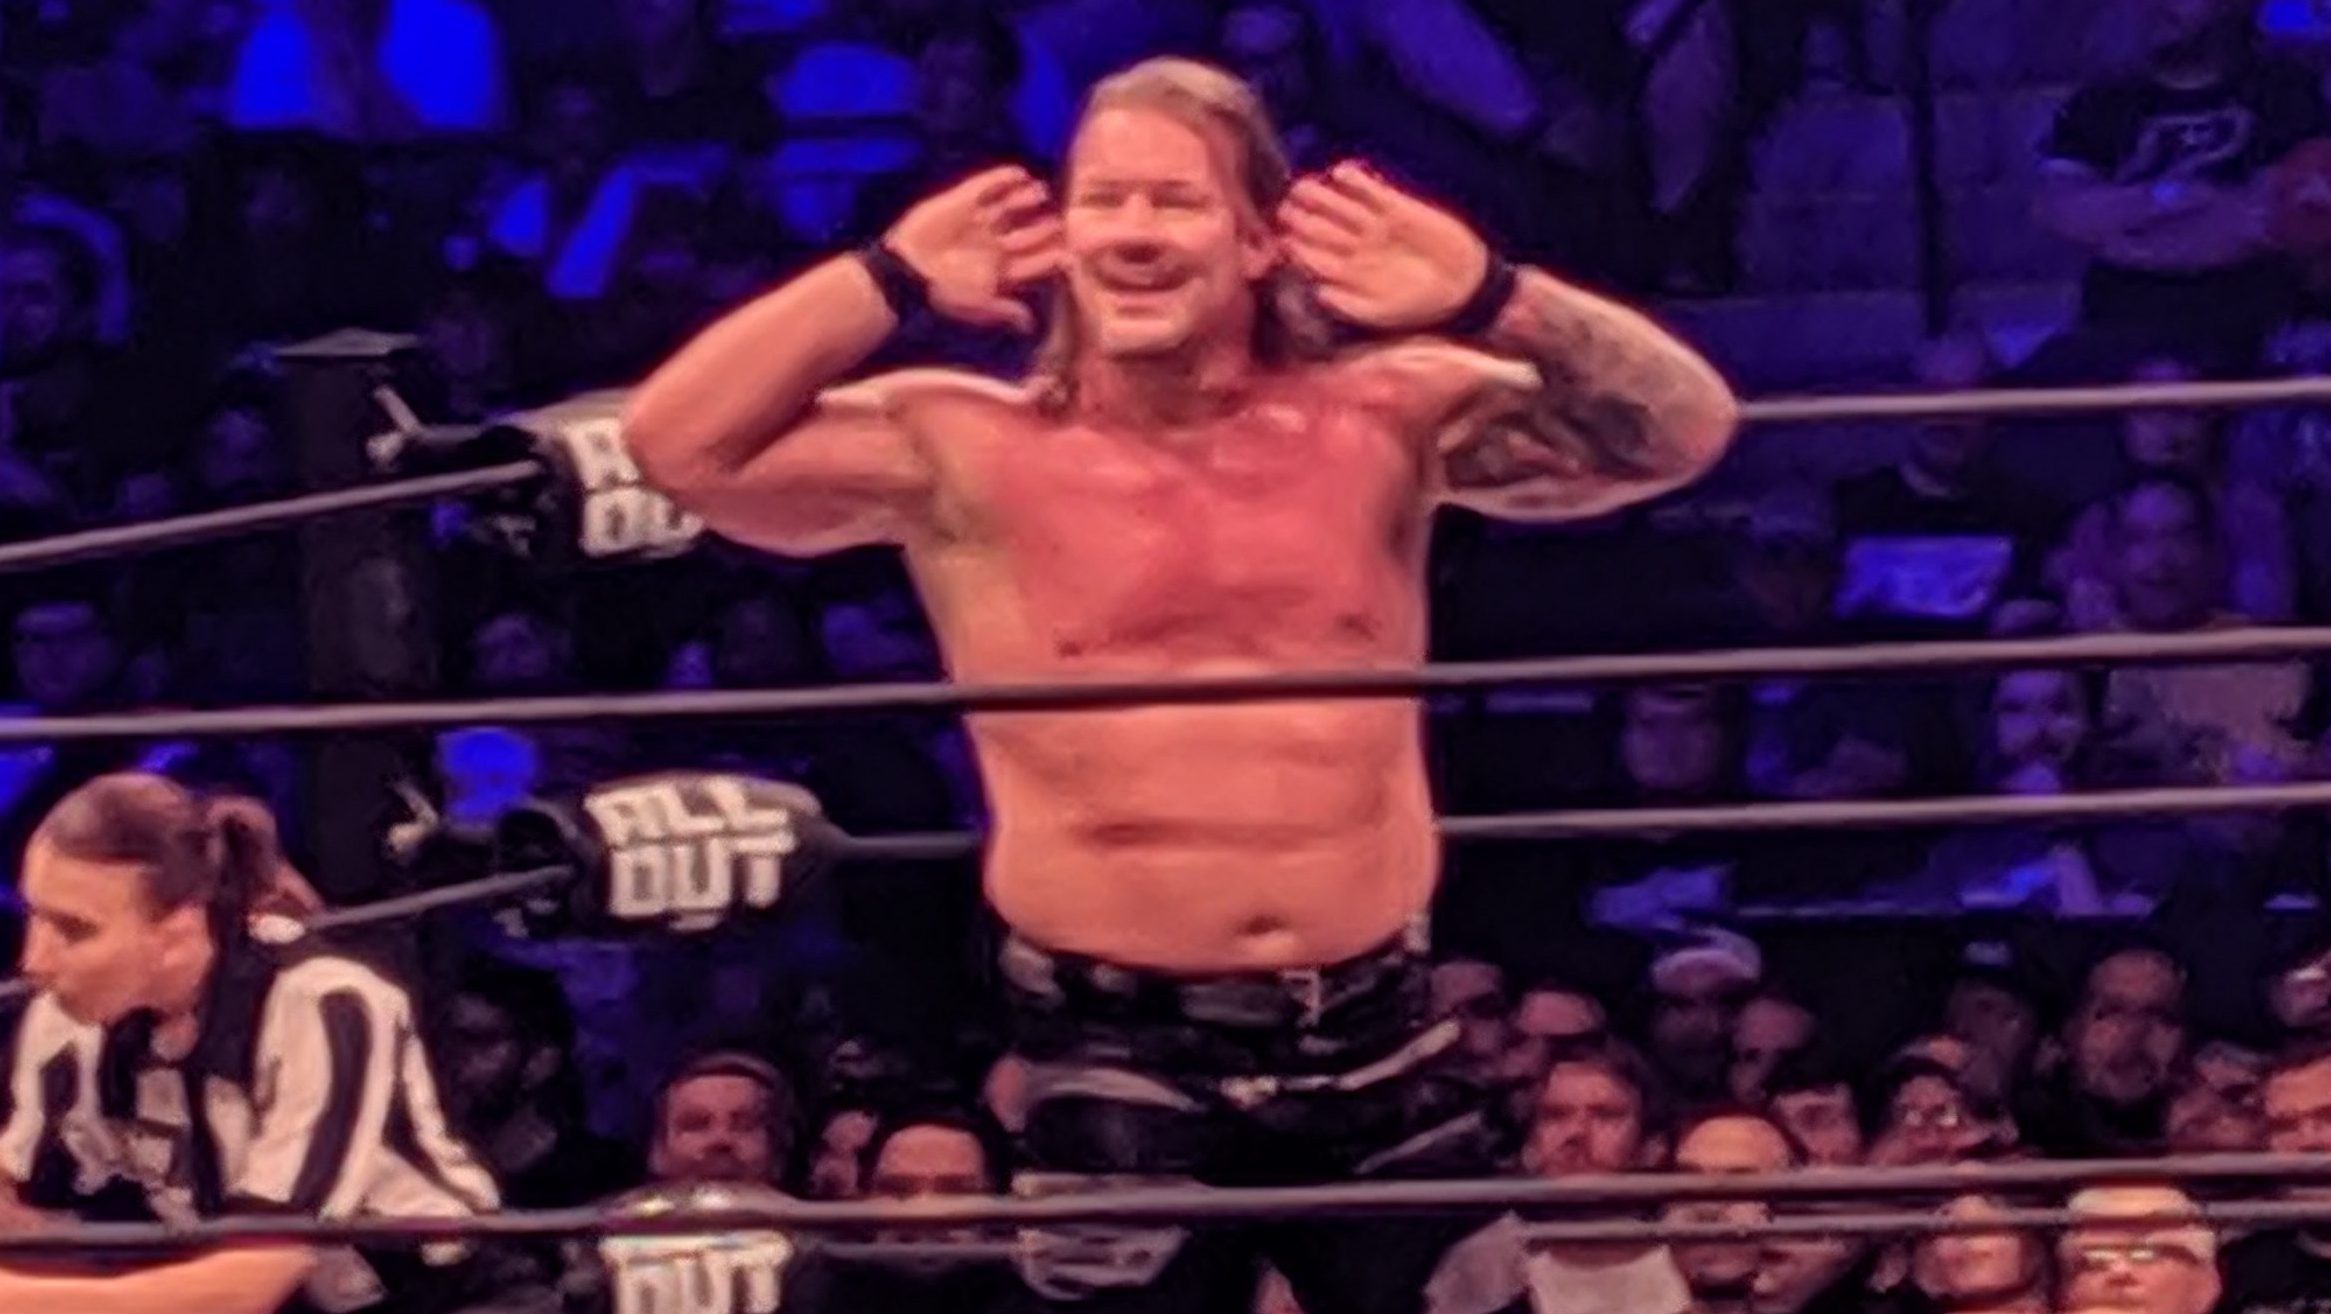 Archive) Chris Jericho, Grand Master Sexy, Playboi Carti, NO FORMULA Credit  - Ghost Ryder from Wrestling Empire Discord : r/WECawArchive